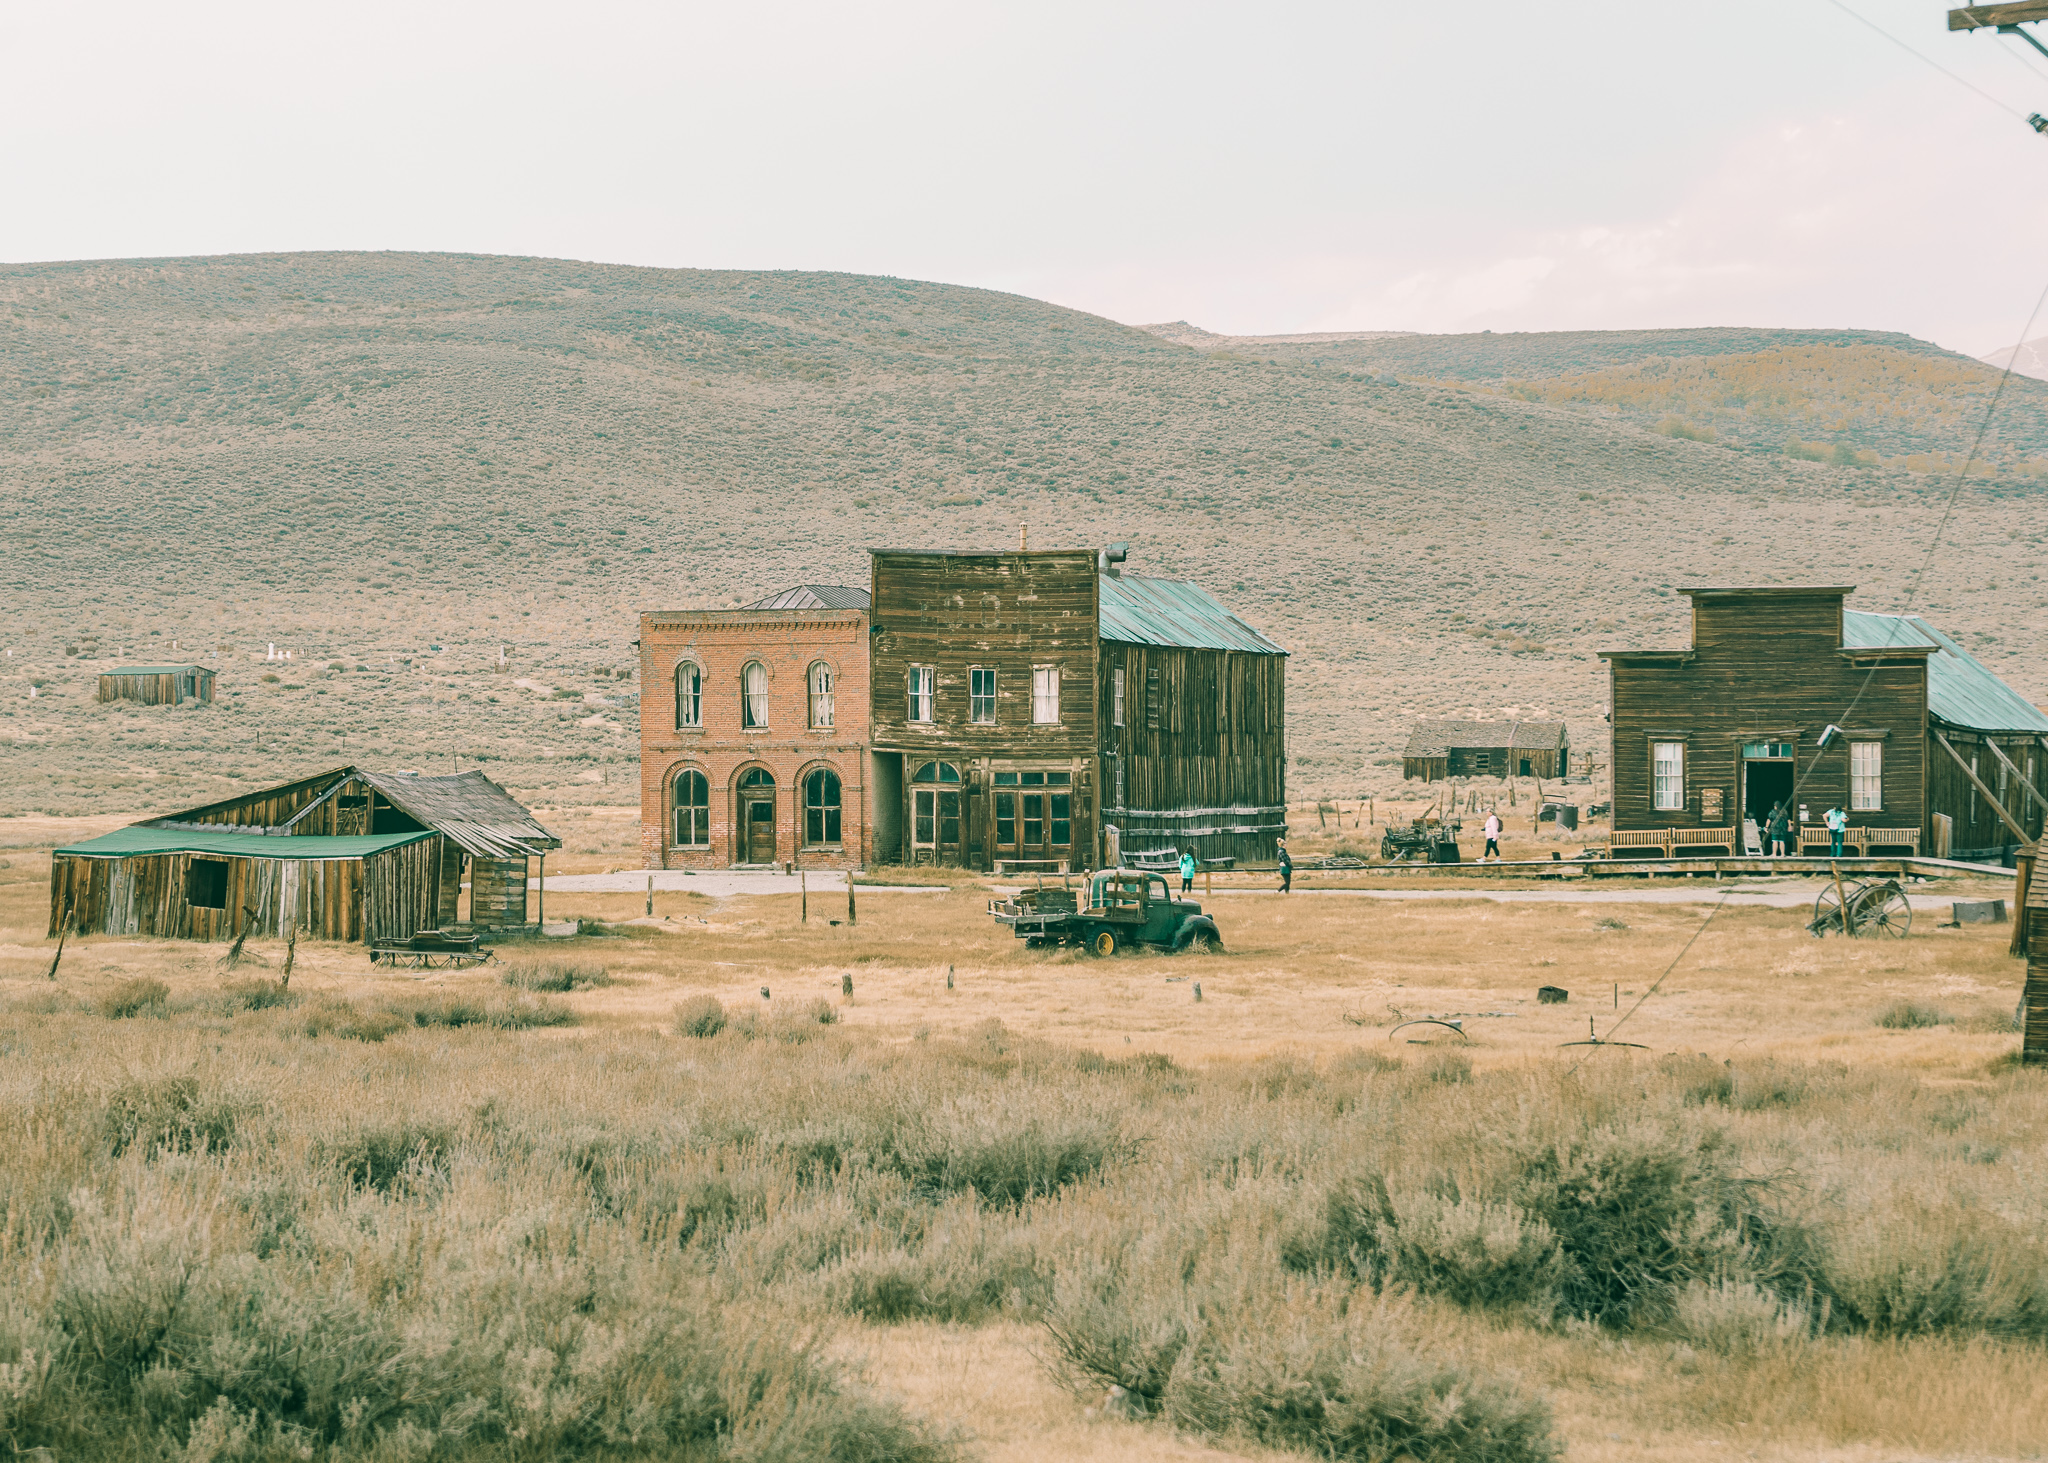 View of the Miner's Hall in Bodie